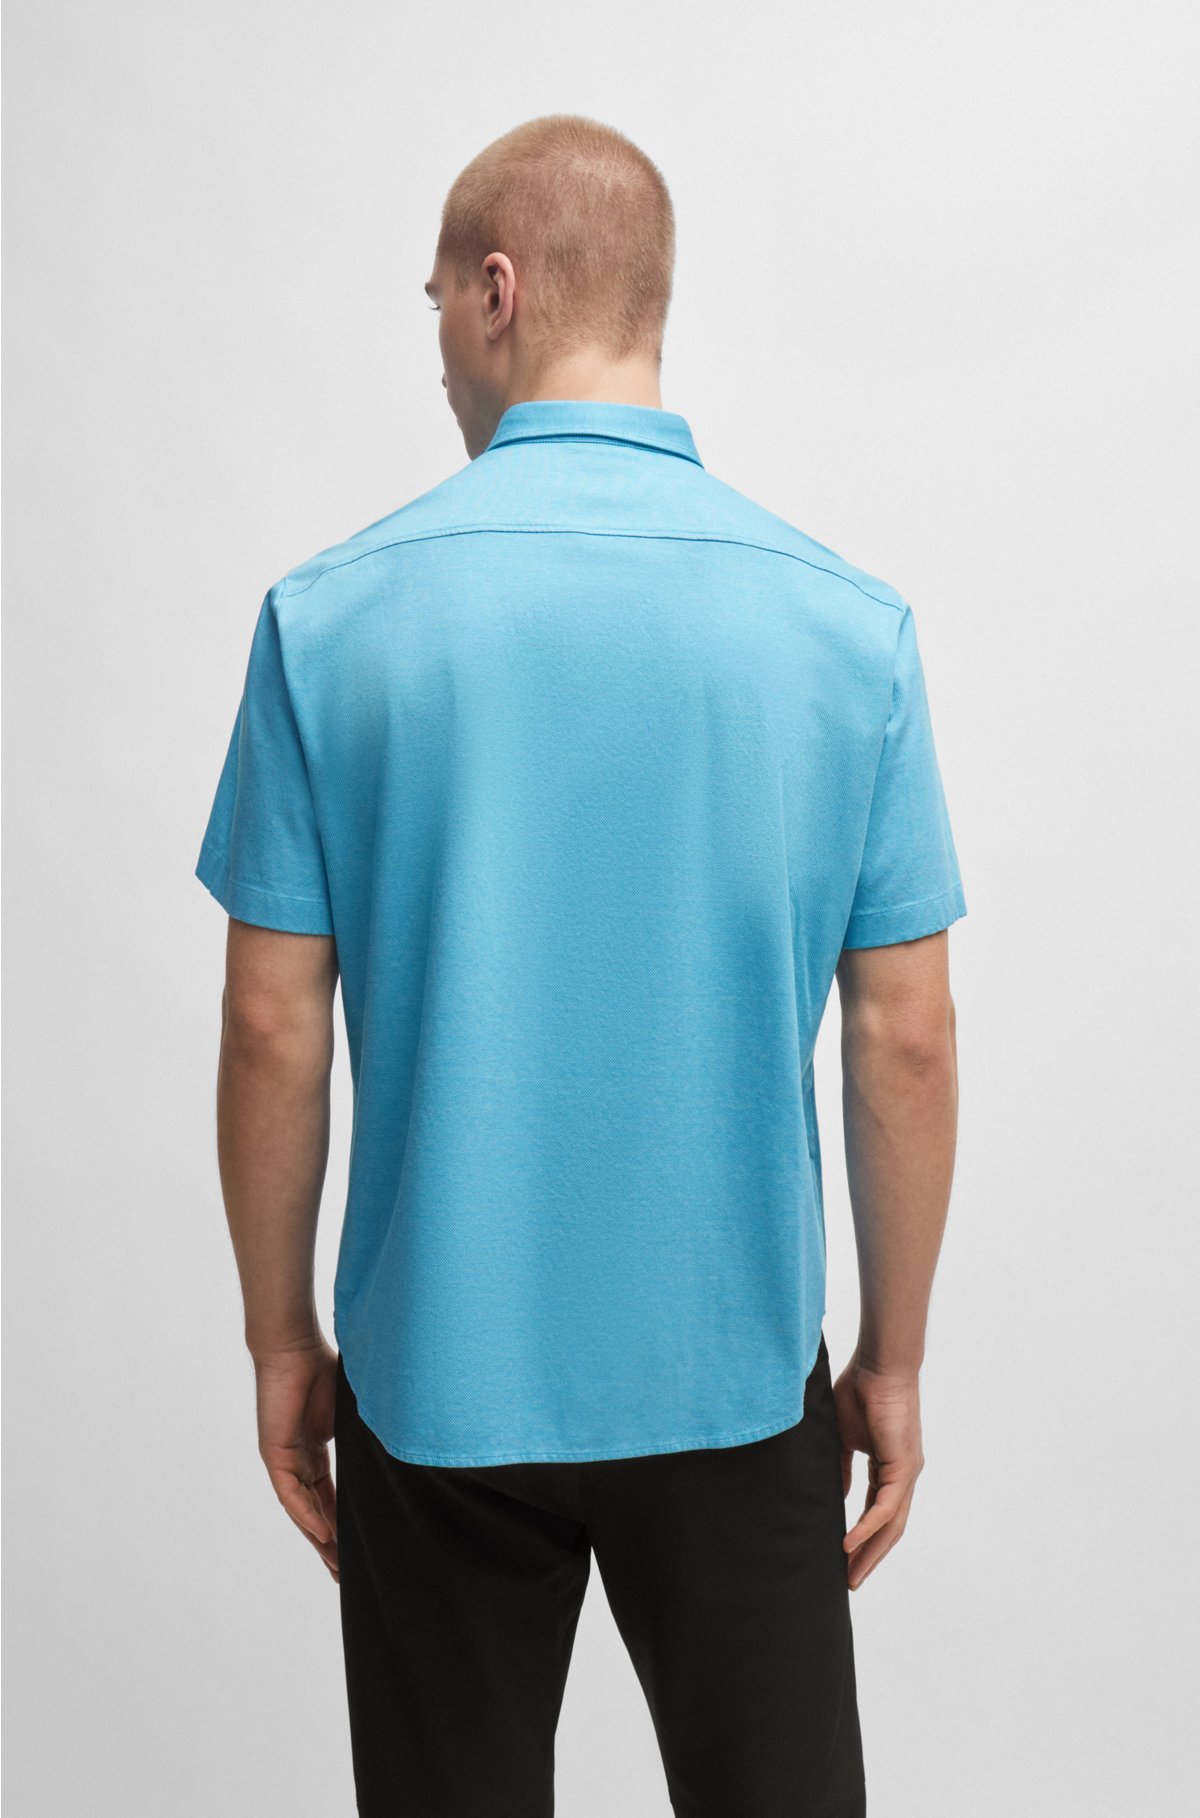 Regular-fit shirt in cotton piqué jersey, Turquoise